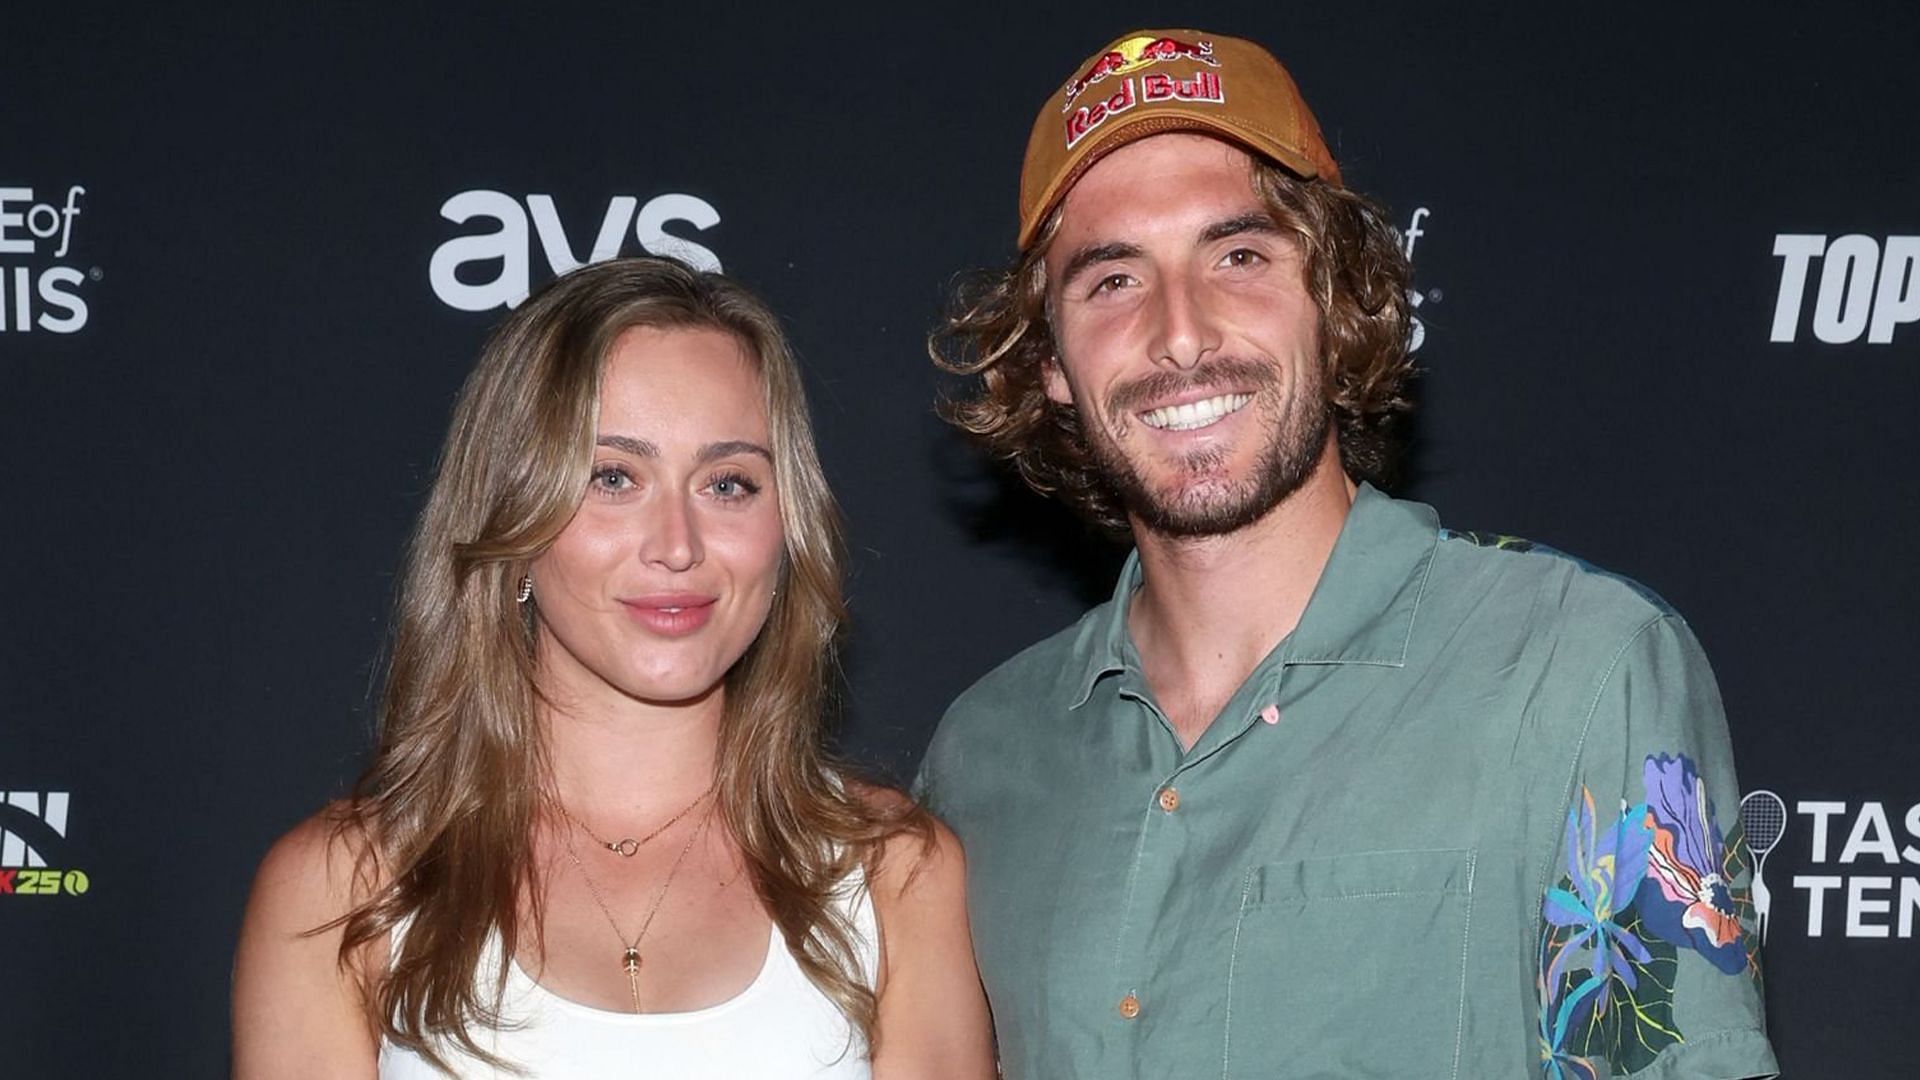 Stefanos Tsitsipas and Paula Badosa competed together at the Tie Break tens